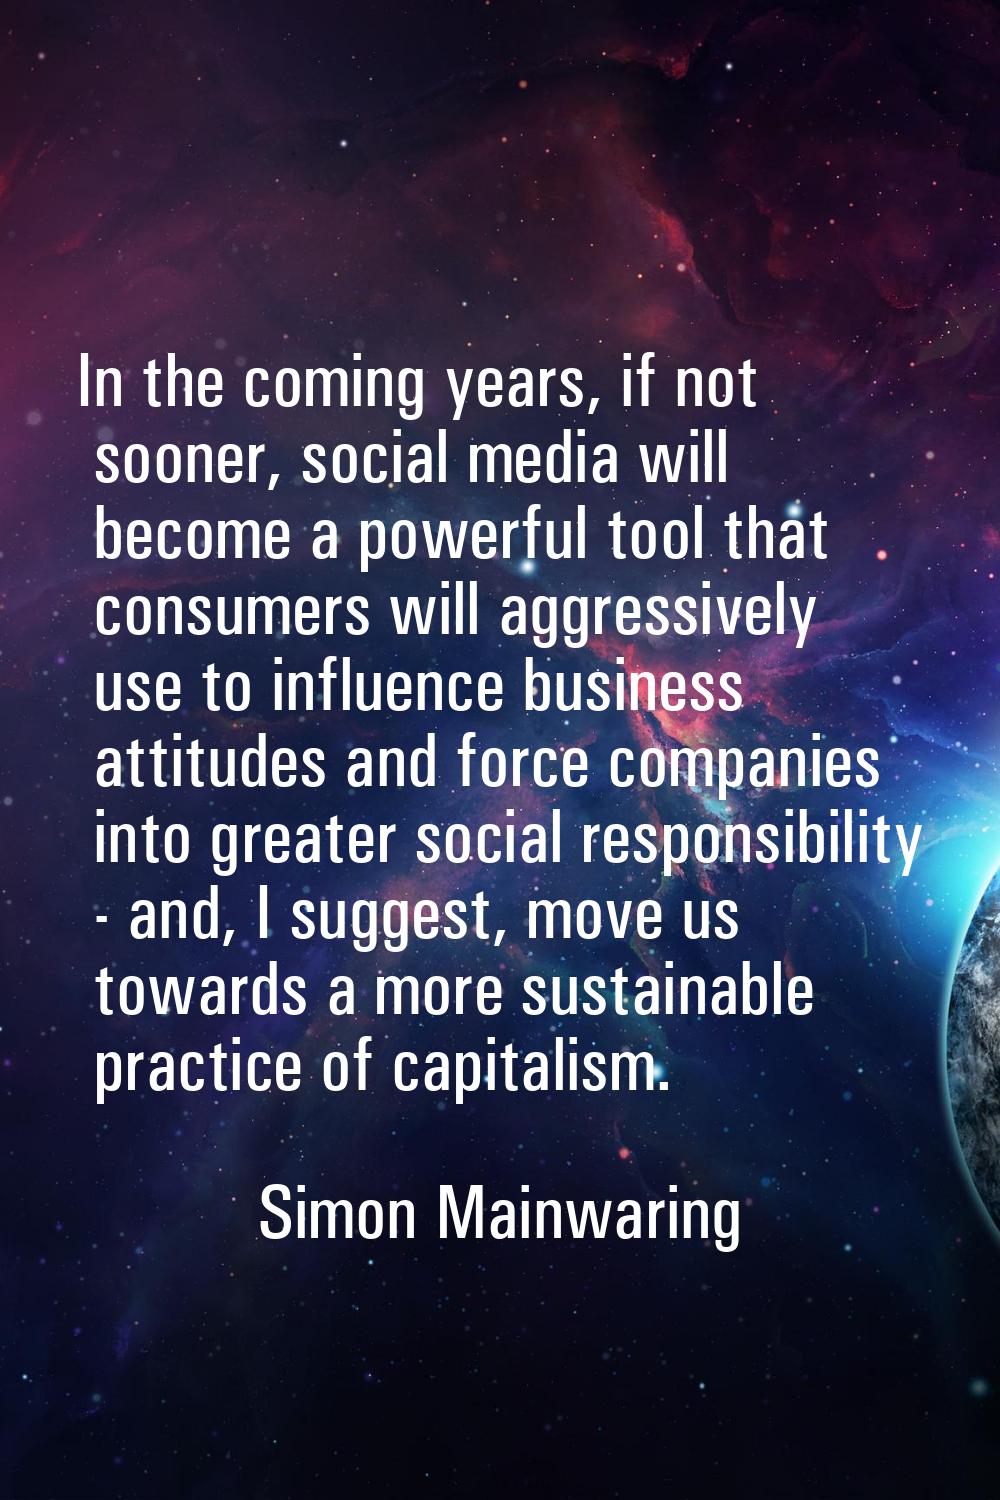 In the coming years, if not sooner, social media will become a powerful tool that consumers will ag